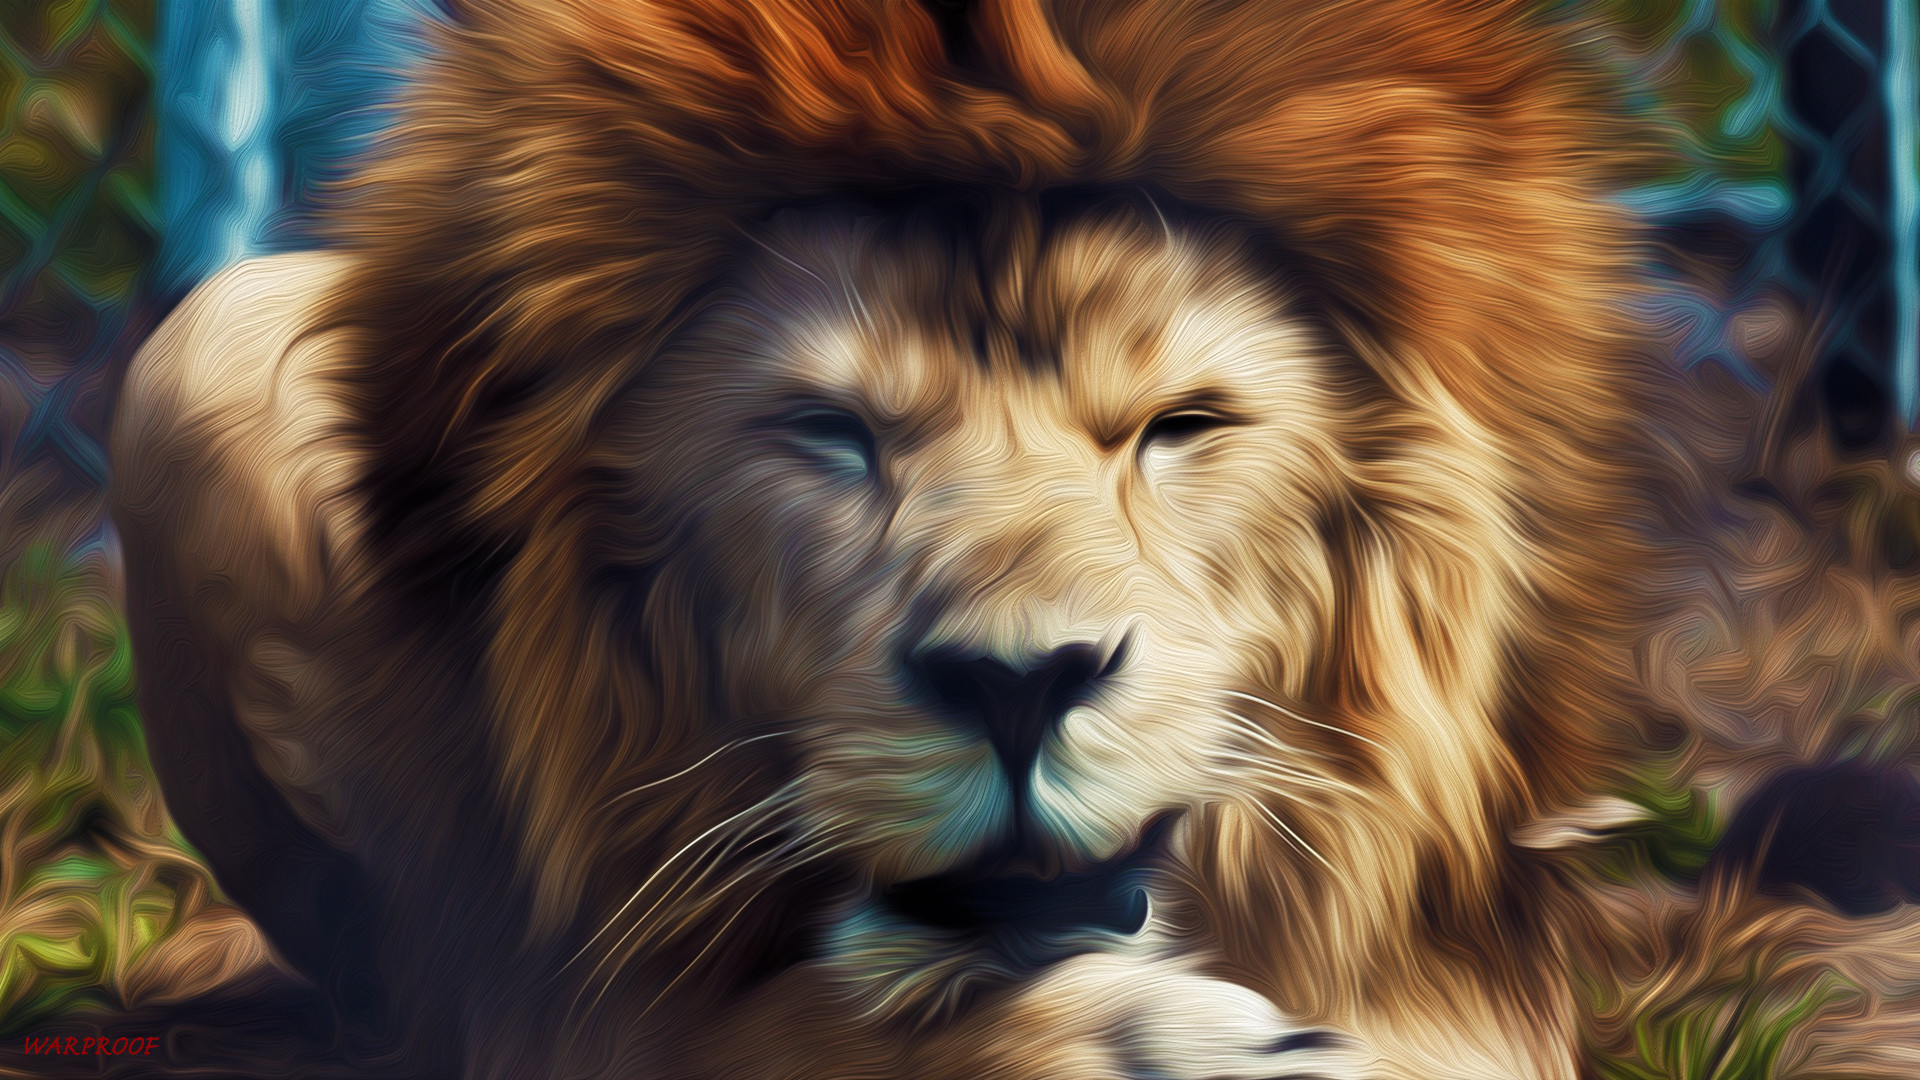 1920x1080 Wallpprs is the world's largest collection of Free HD Lion illustration  Wallpapers.